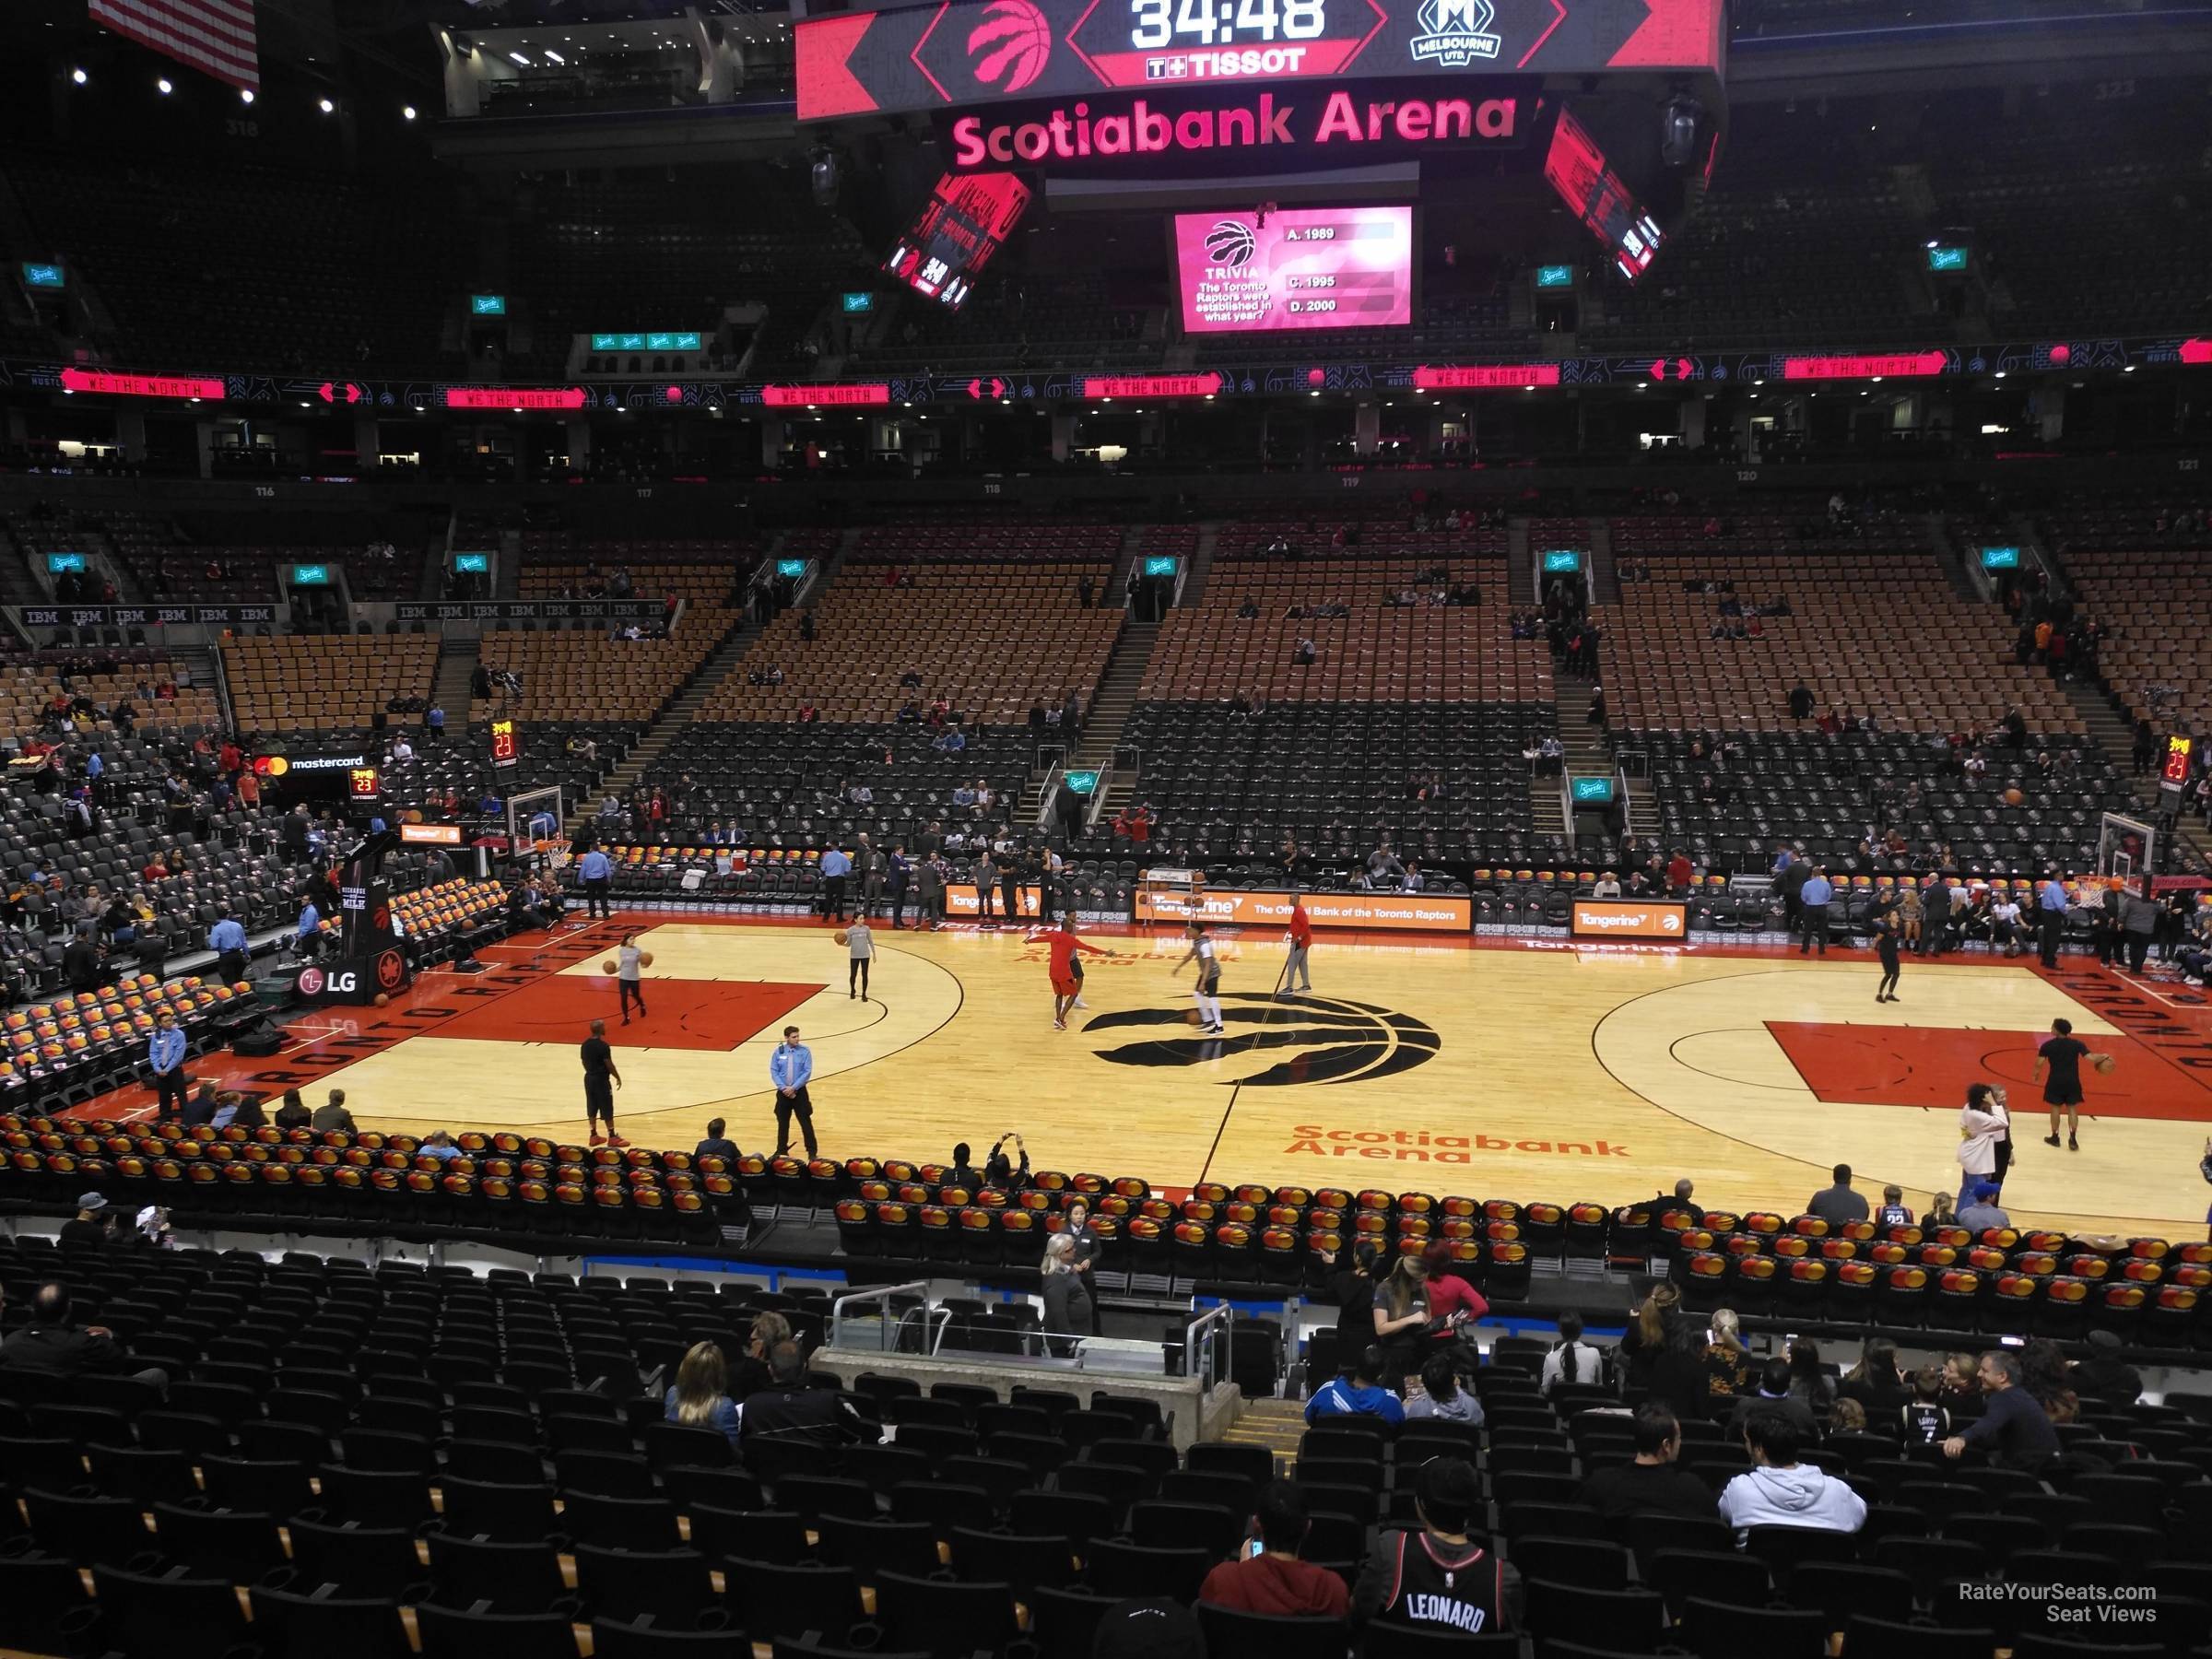 section 108, row 28 seat view  for basketball - scotiabank arena